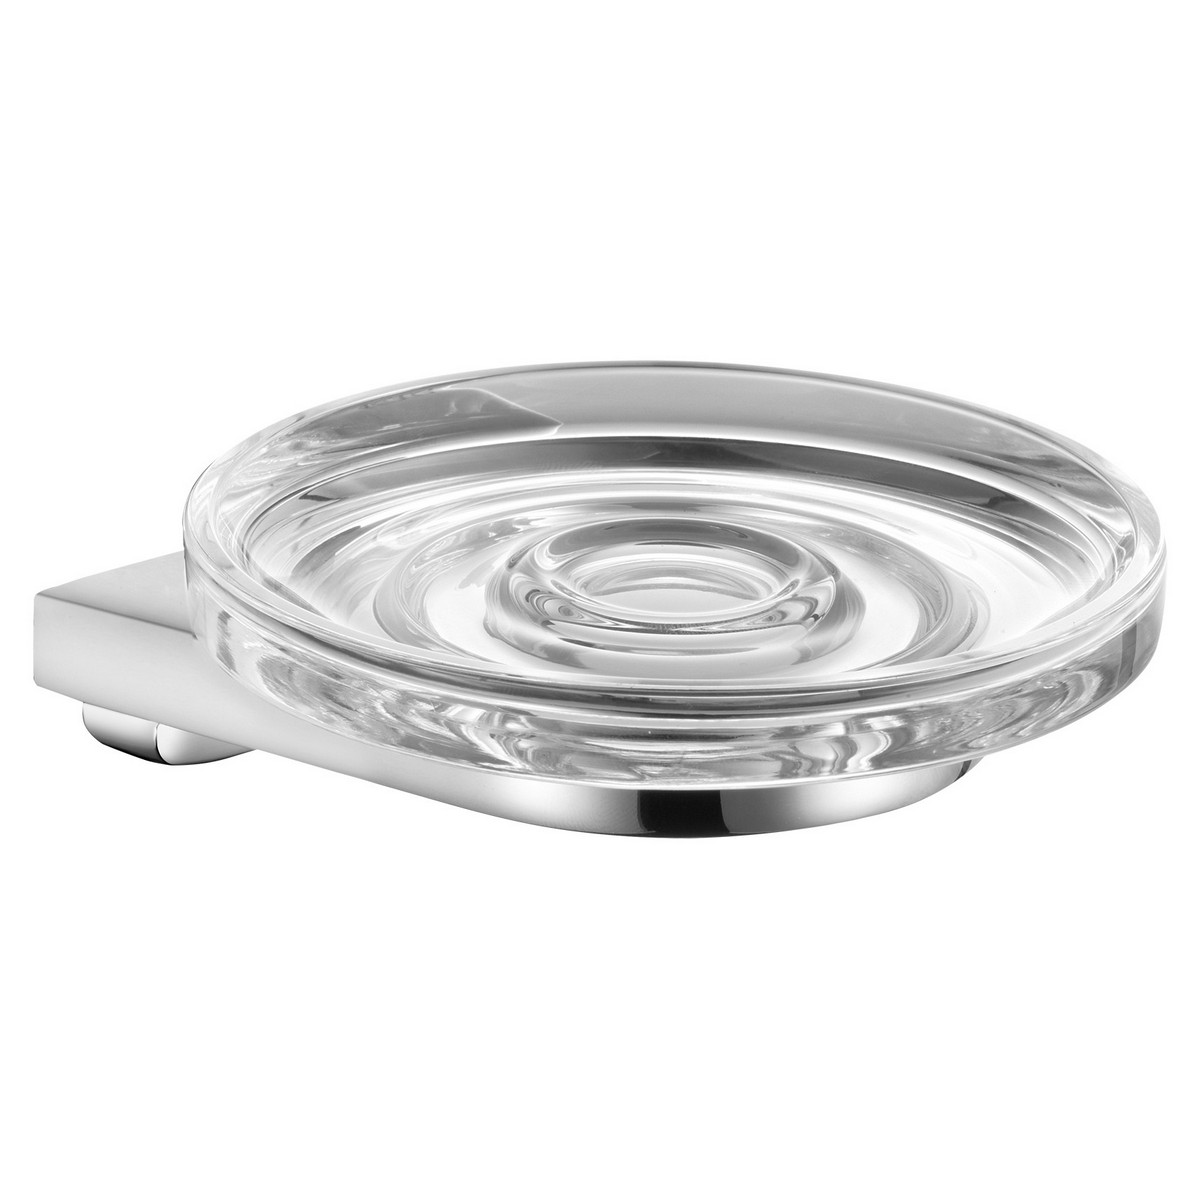 KEUCO 12755019000 MOLL 4 1/2 INCH WALL MOUNTED SOAP HOLDER IN POLISHED CHROME